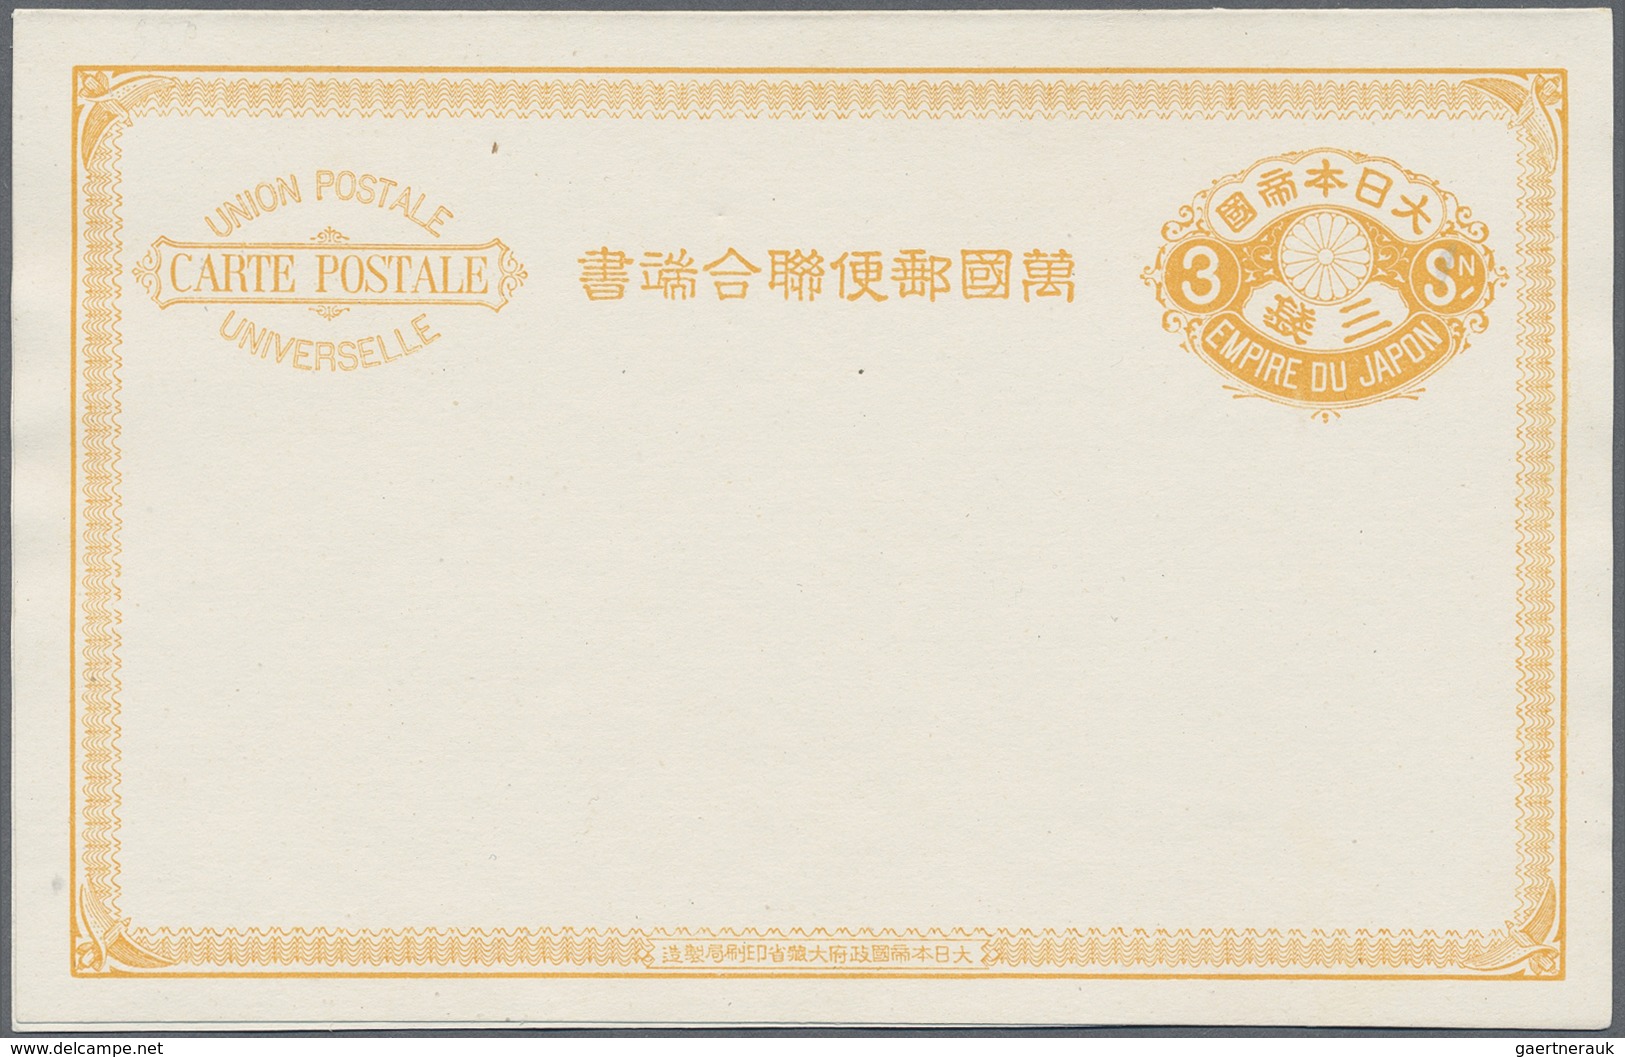 GA Japan - Ganzsachen: 1873/1960, mint only collection of 94 almost all different cards/UPU-cards/wrapp